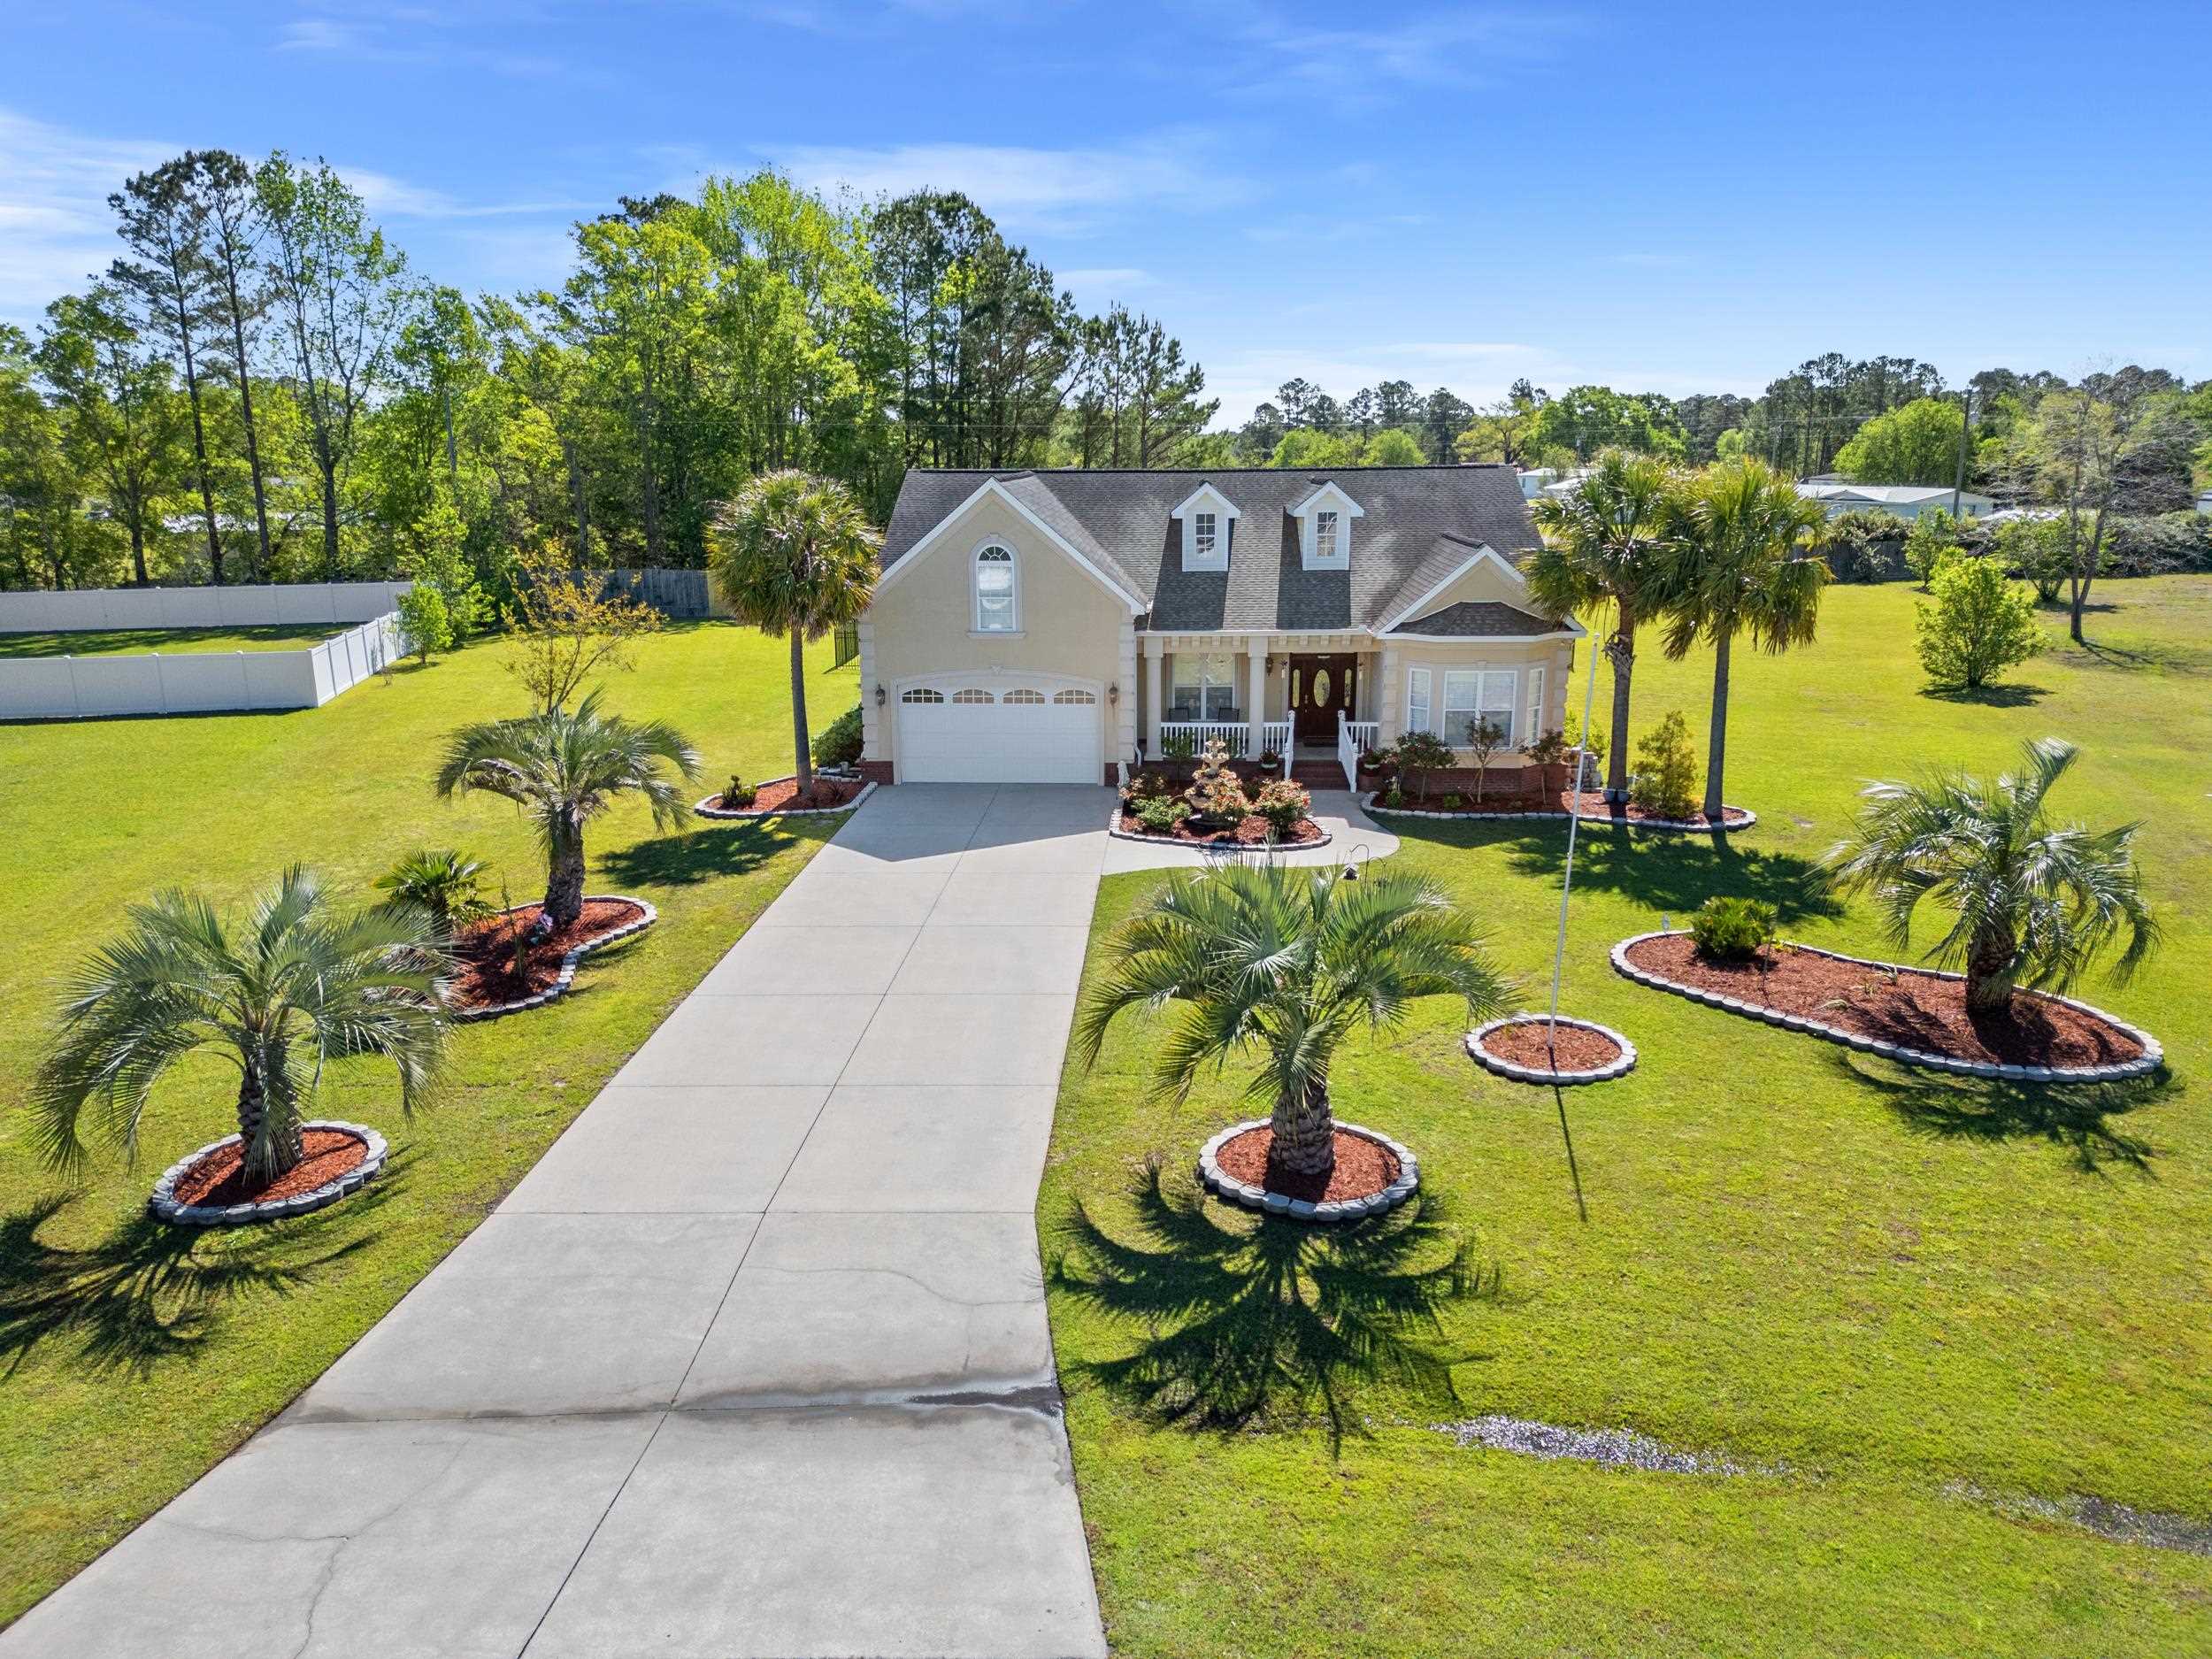 this beautiful custom home is waiting for you, just minutes from downtown conway!  located in the faith hills community, this amazing home has all the curb appeal you could ever want! as you approach this home, you are welcomed with an extra-long driveway that leads you to a relaxing and inviting front porch! when you open the front door, you will immediately see the stunning marble tile floors and the open concept. hardwood flooring exists throughout the dining and family room. the owner remodeled the kitchen with state-of-the-art appliances, which makes cooking a joy. there are four first floor bedrooms, including two primary suites to give everyone plenty of space. a bonus room is located upstairs that could serve as a fifth bedroom or many different purposes. custom light fixtures can be found in the great room and master bedroom. the master bath is a little piece of heaven with custom tile and a jacuzzi tub for your relaxation. don’t forget the carolina room that overlooks the fenced in backyard complete with patio, which is perfect for entertaining, playing and family dogs. this is country living at its best with easy access to highway 501, conway and the beach. schedule your showing today to see this rare beauty in person!